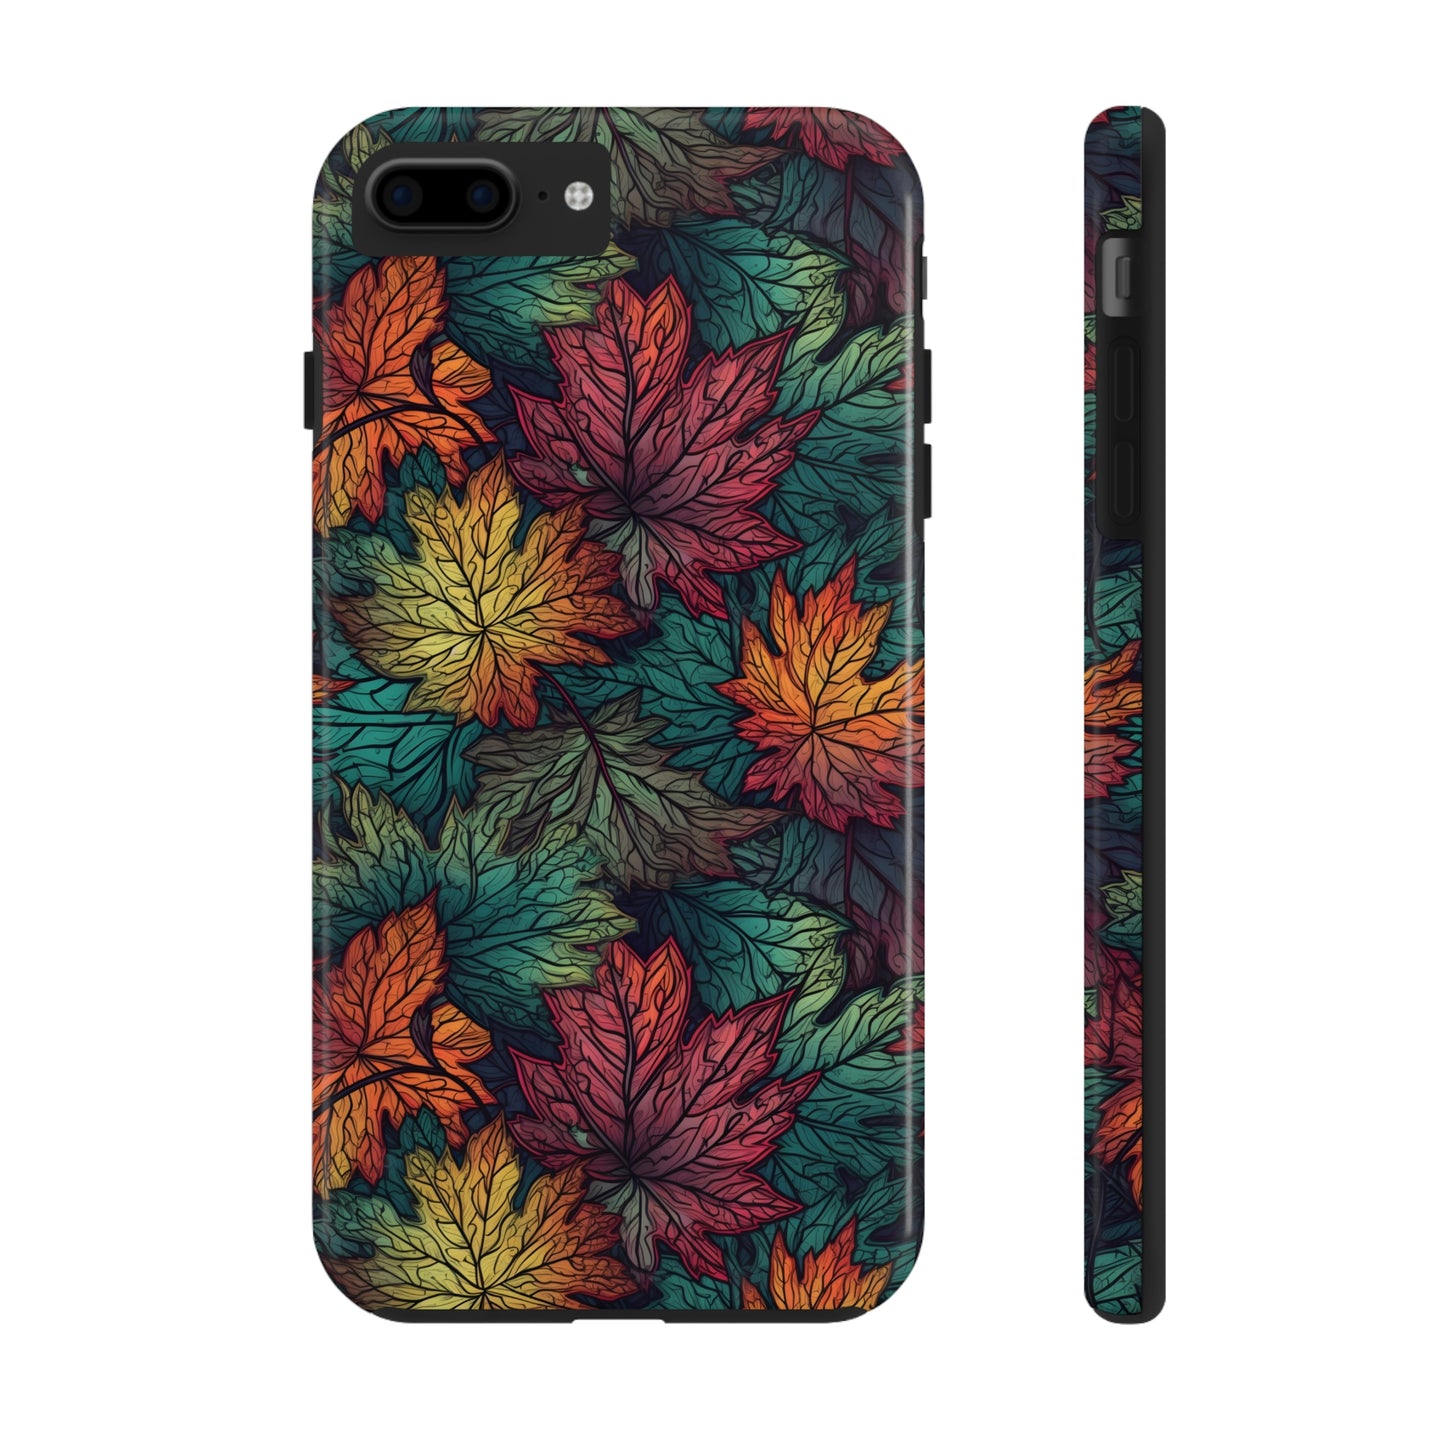 Maple leaf patterns, Fall color, Tough Phone Cases, Case-Mate